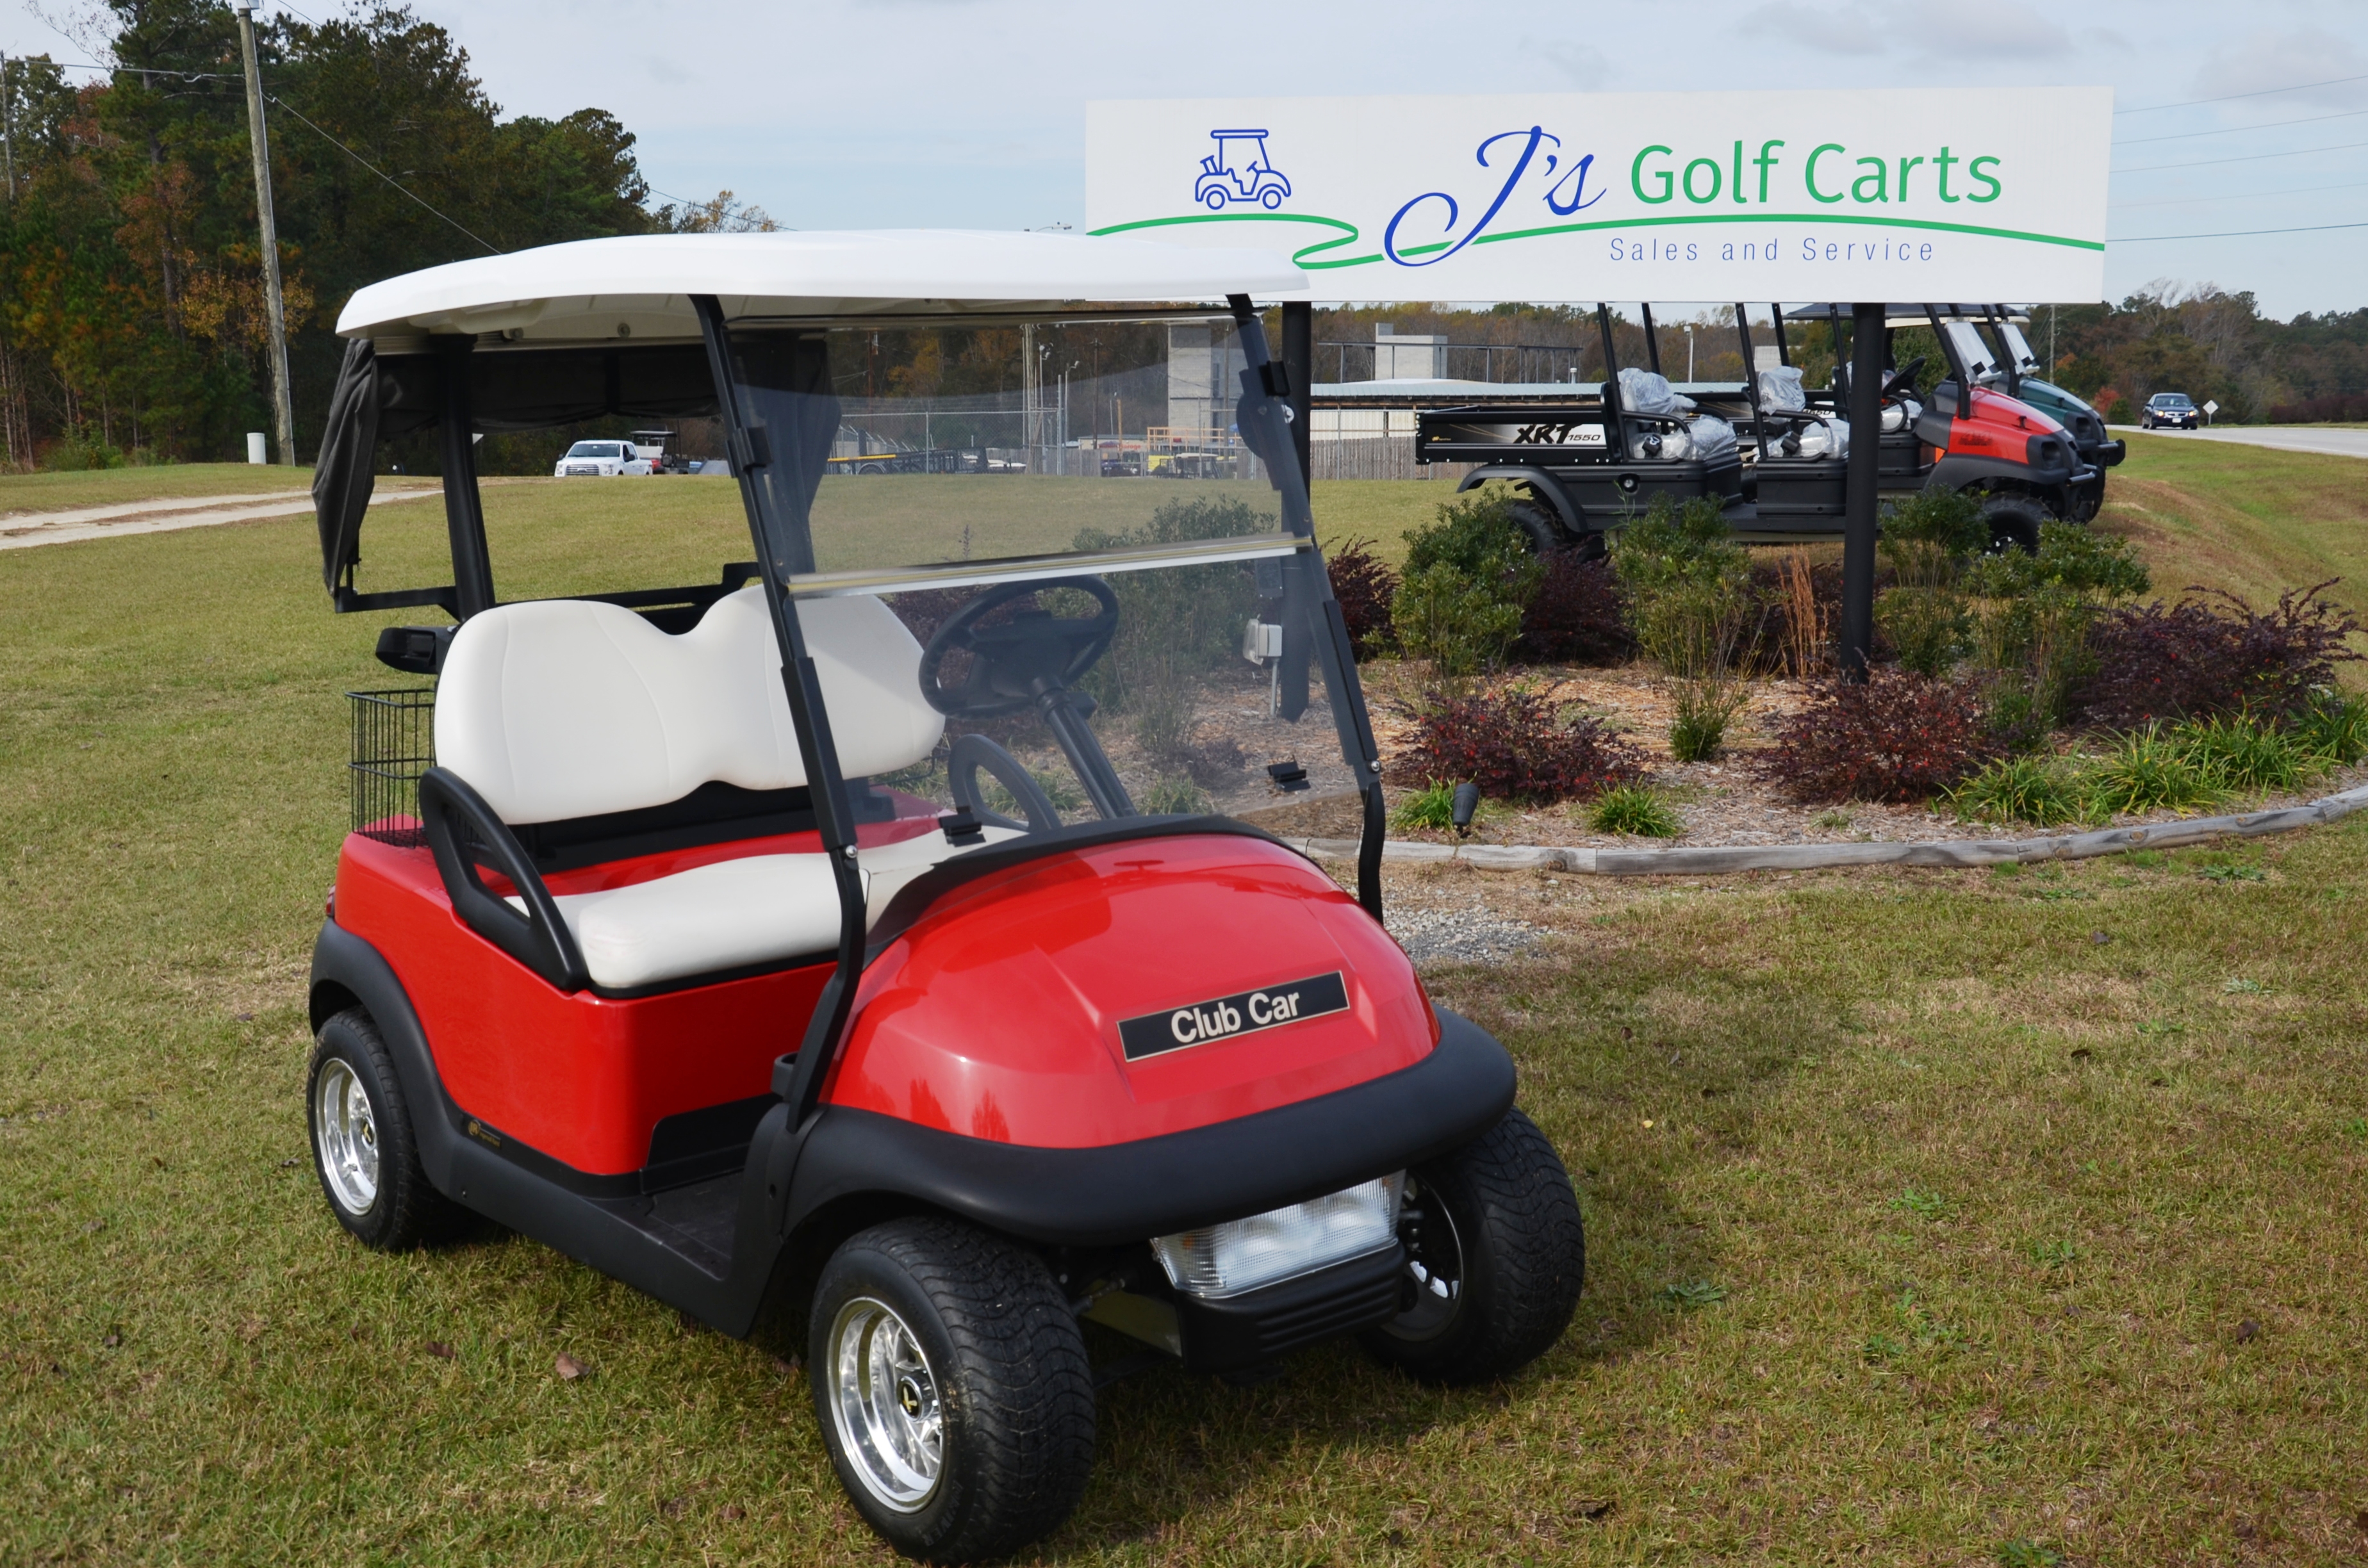 Used Golf Carts for Sale in Chapel Hill | J's Golf Carts